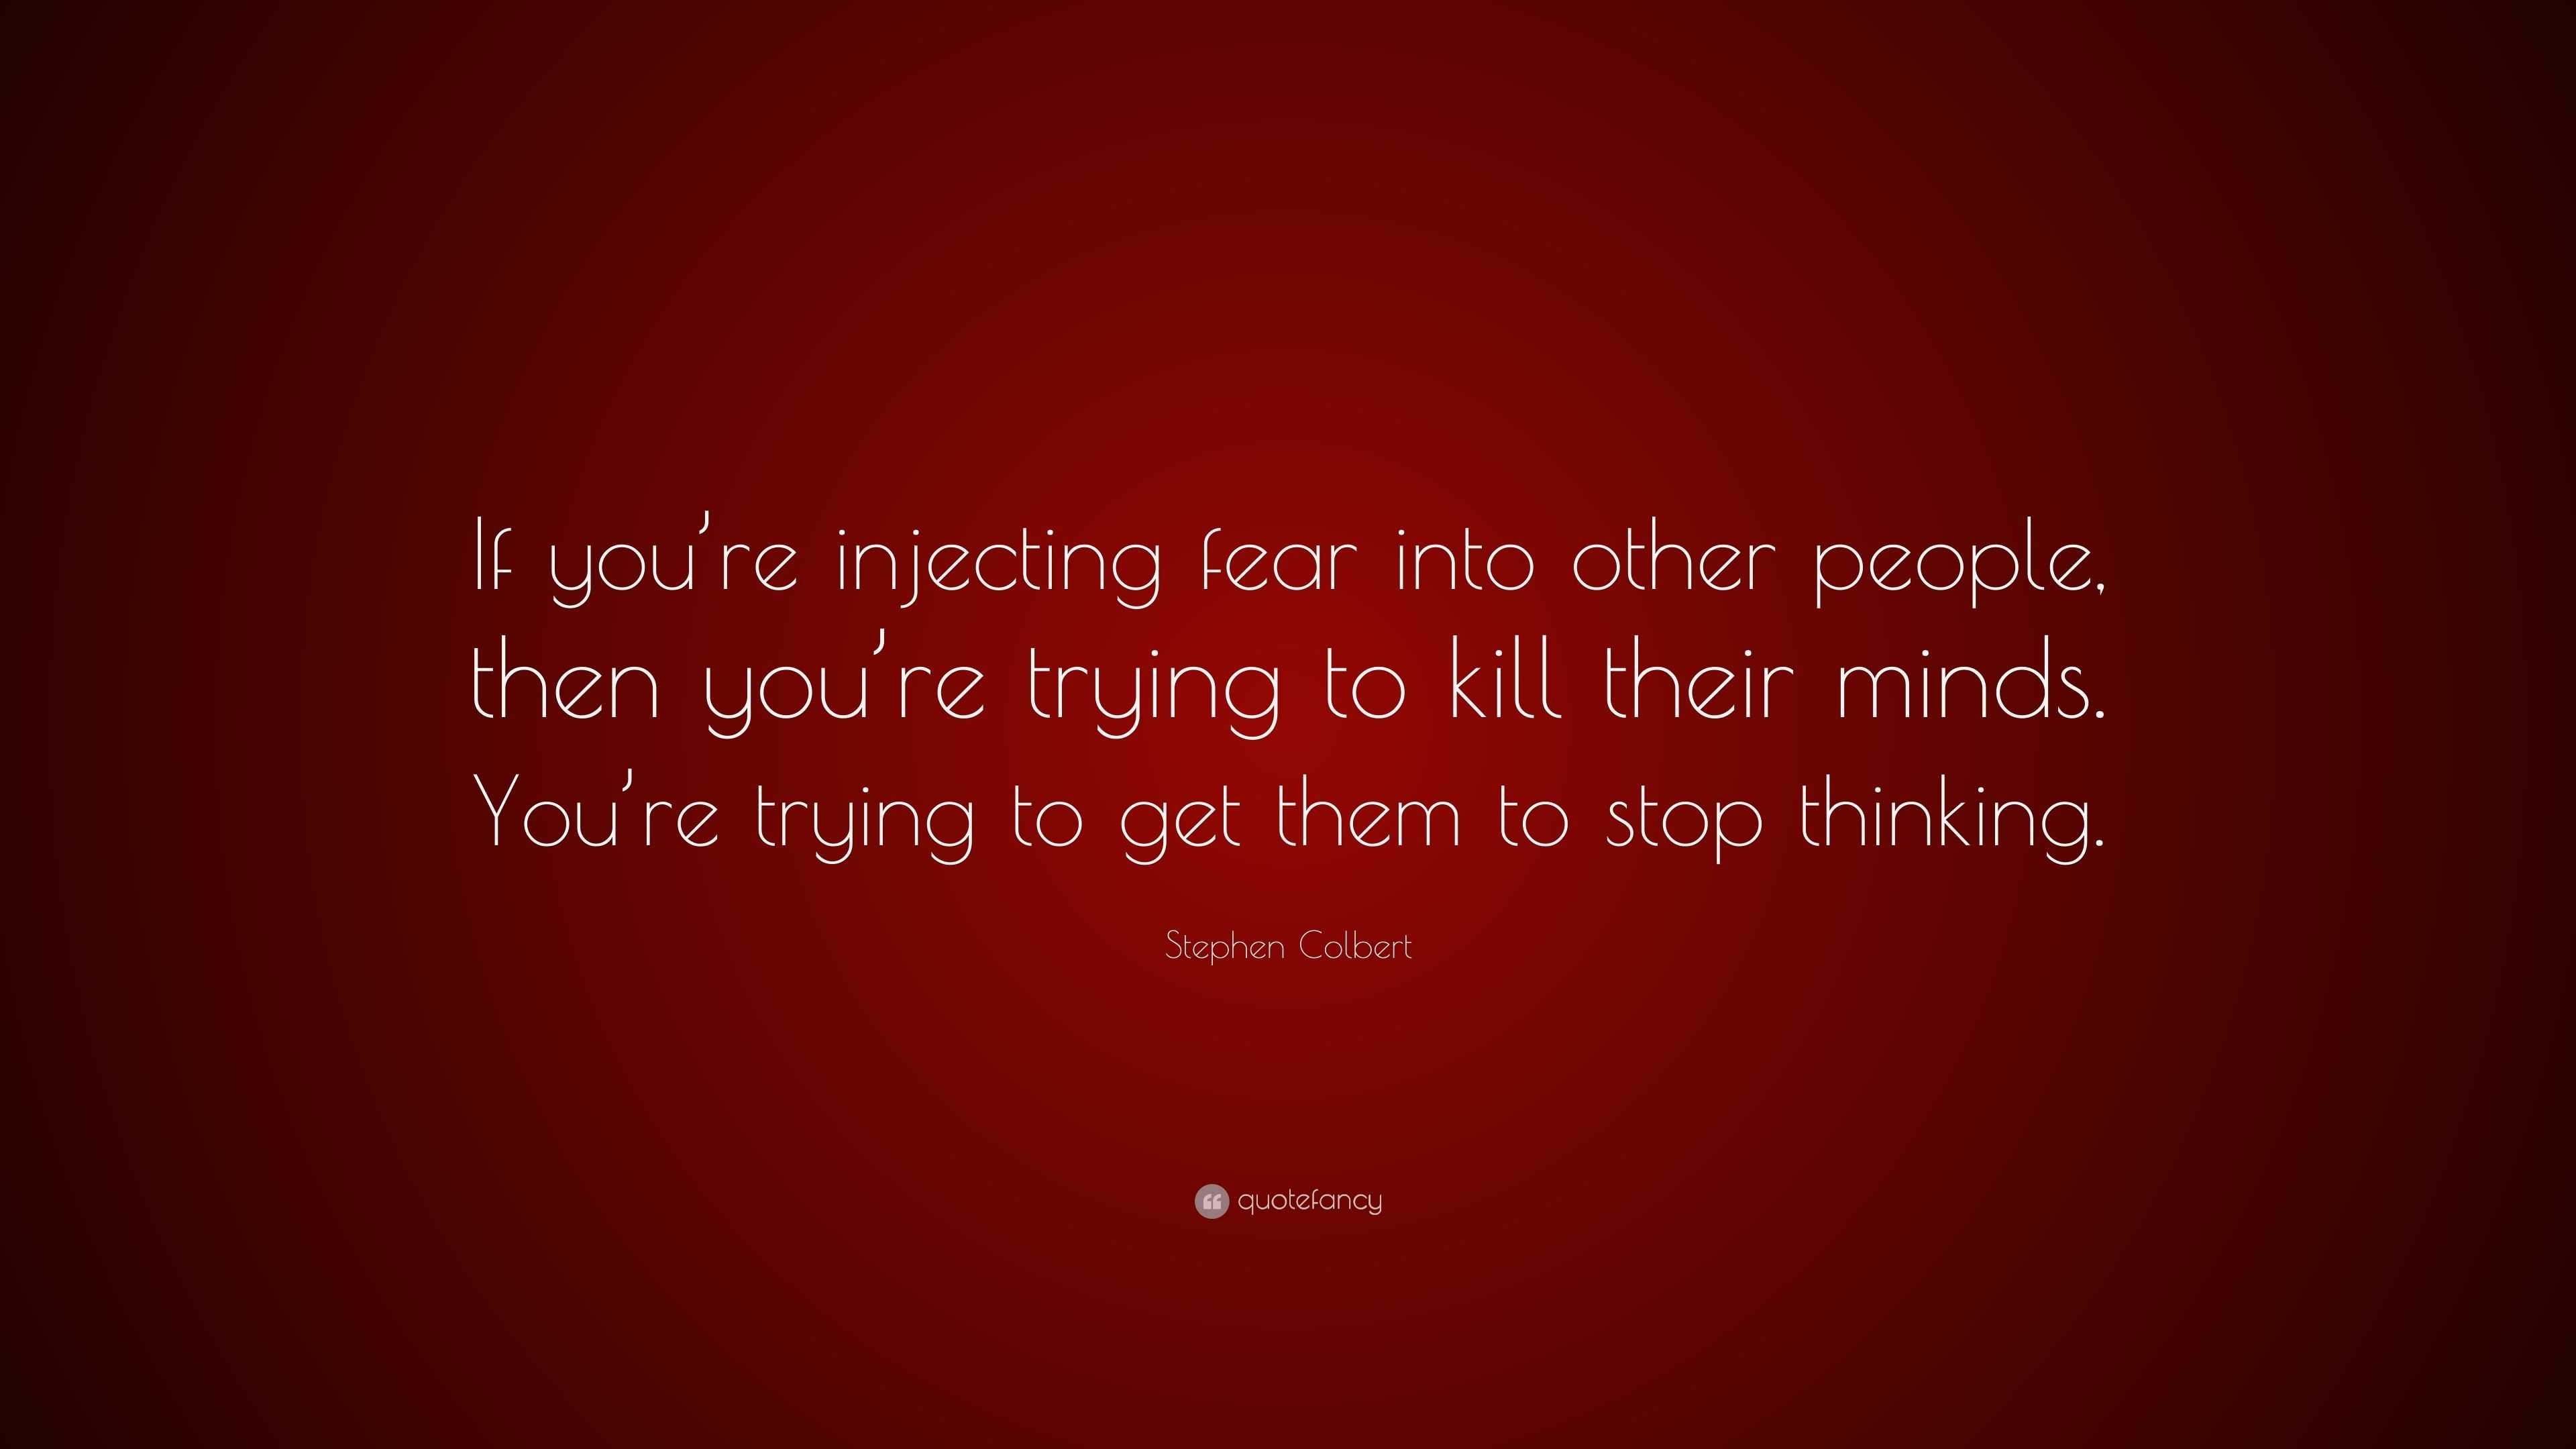 Stephen Colbert Quote: “If you’re injecting fear into other people ...